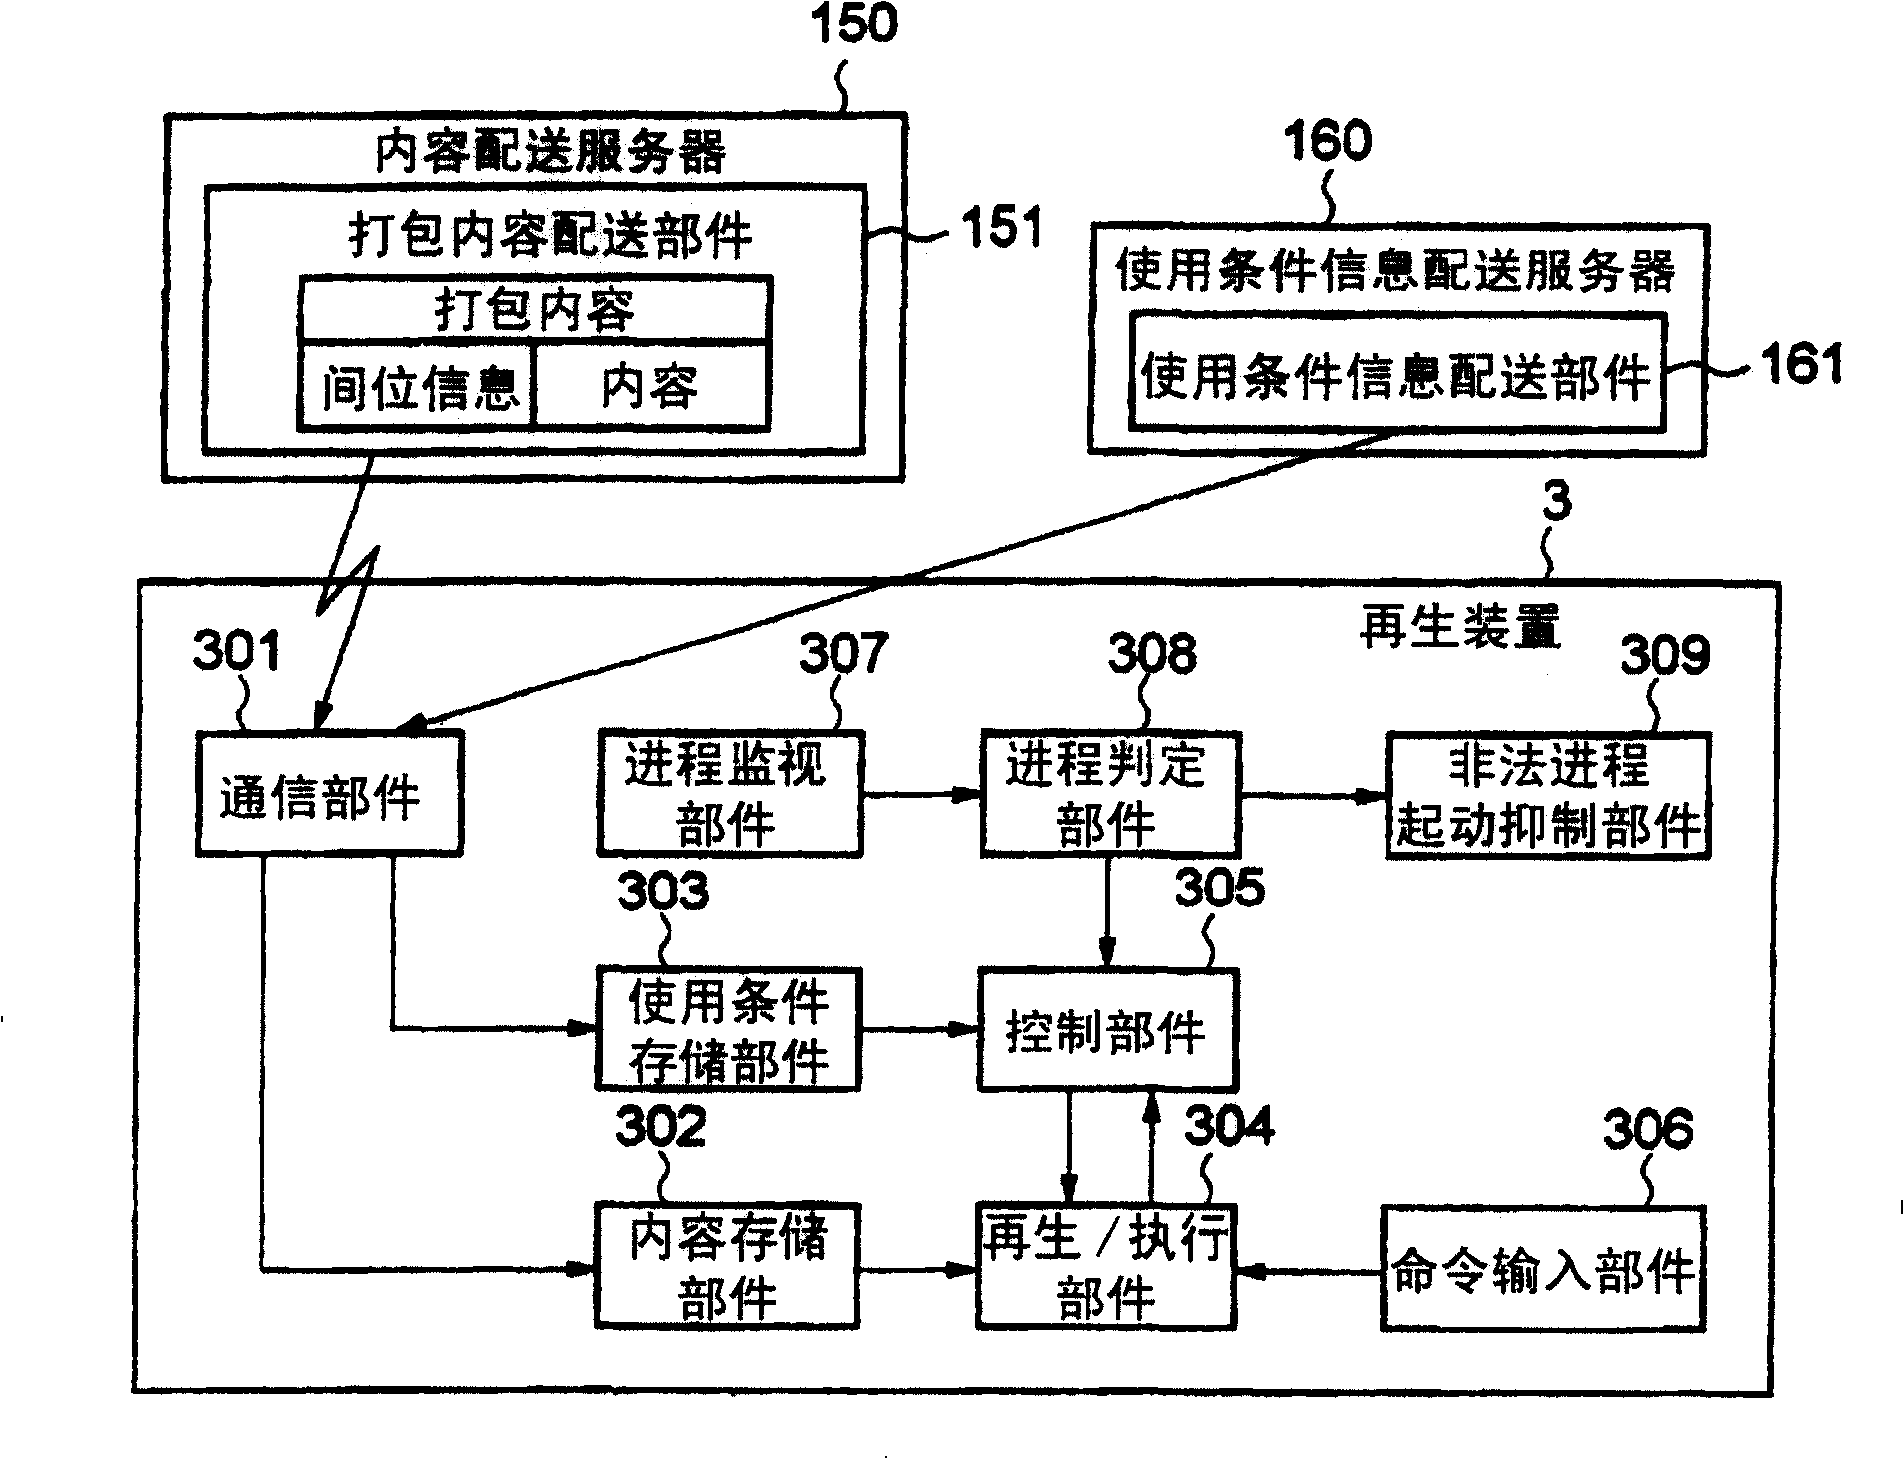 Content reproduction control method